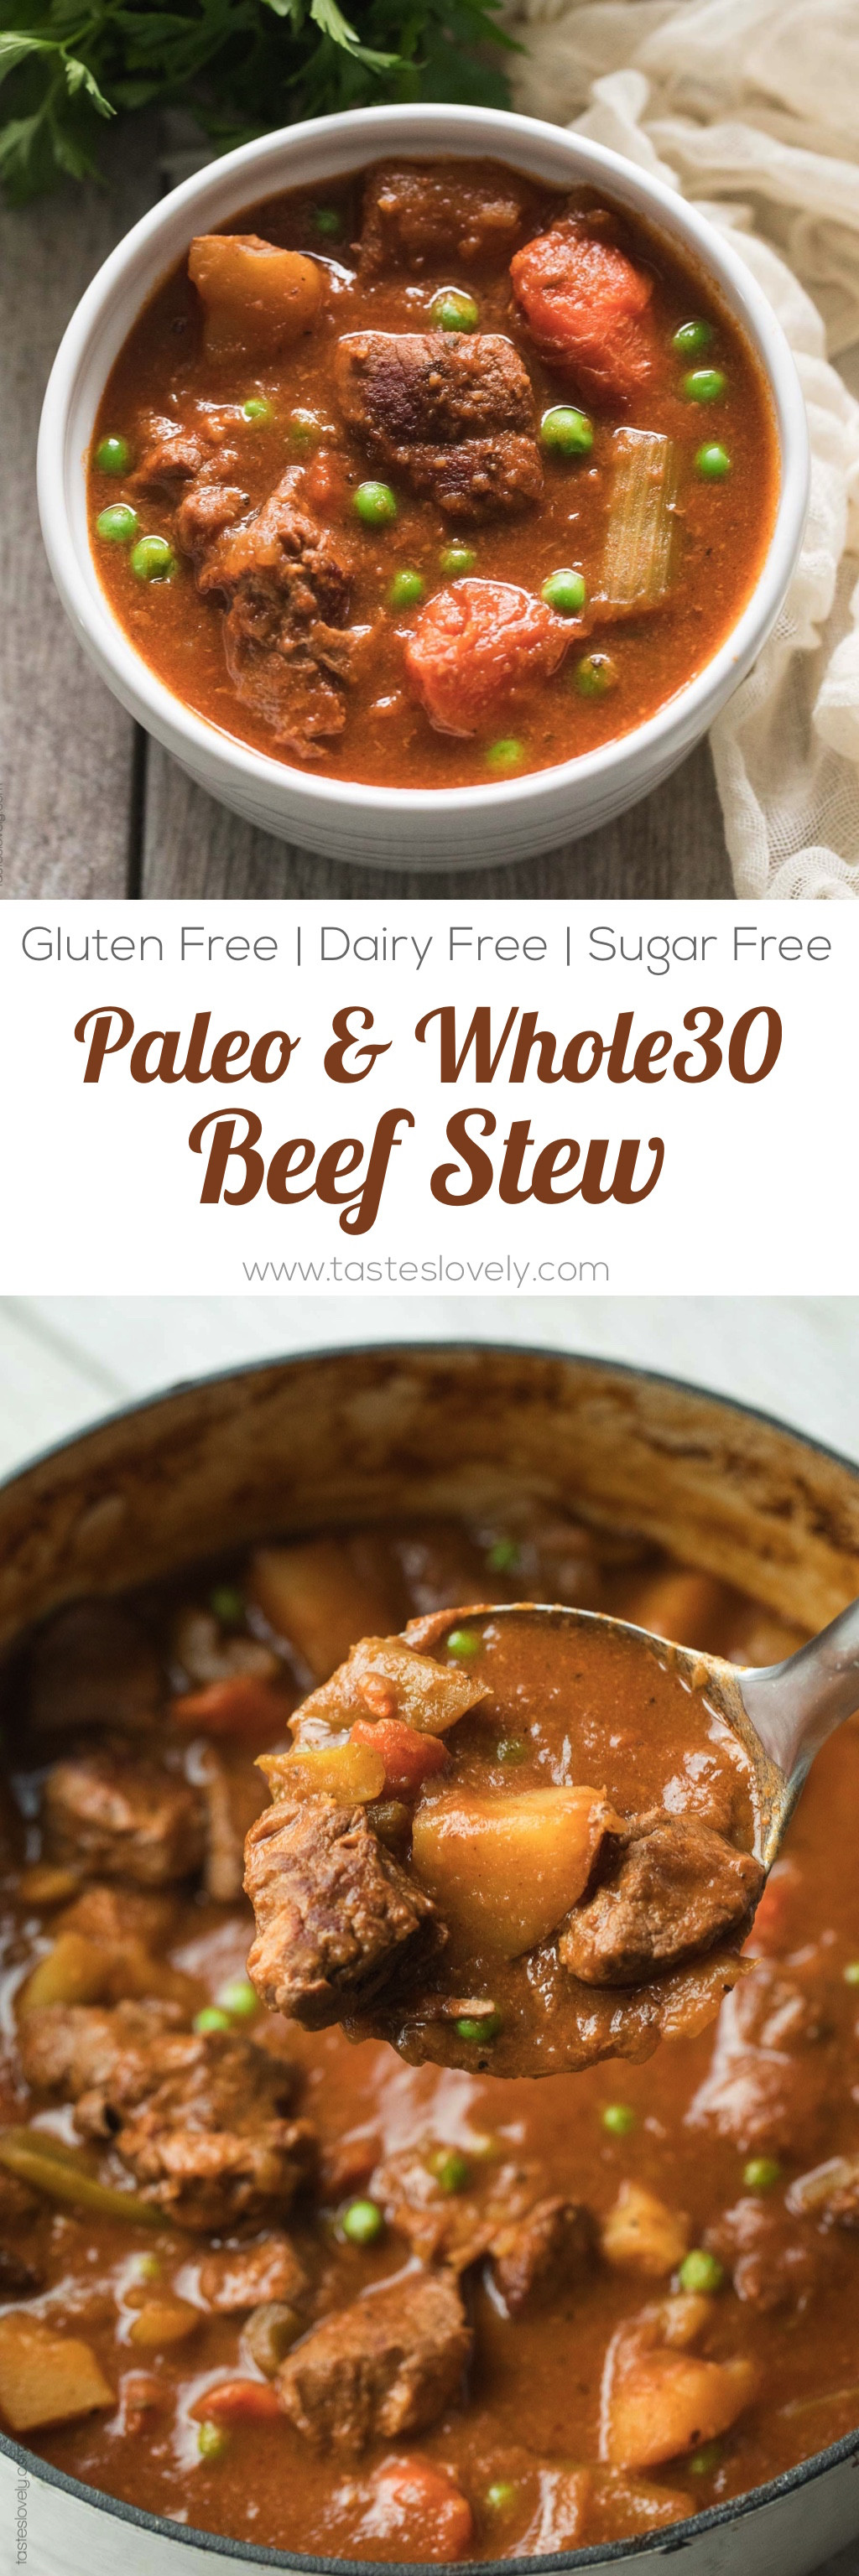 Gluten Free Dairy Free Ground Beef Recipes
 Paleo & Whole30 Beef Stew Slow Cooker or Dutch Oven